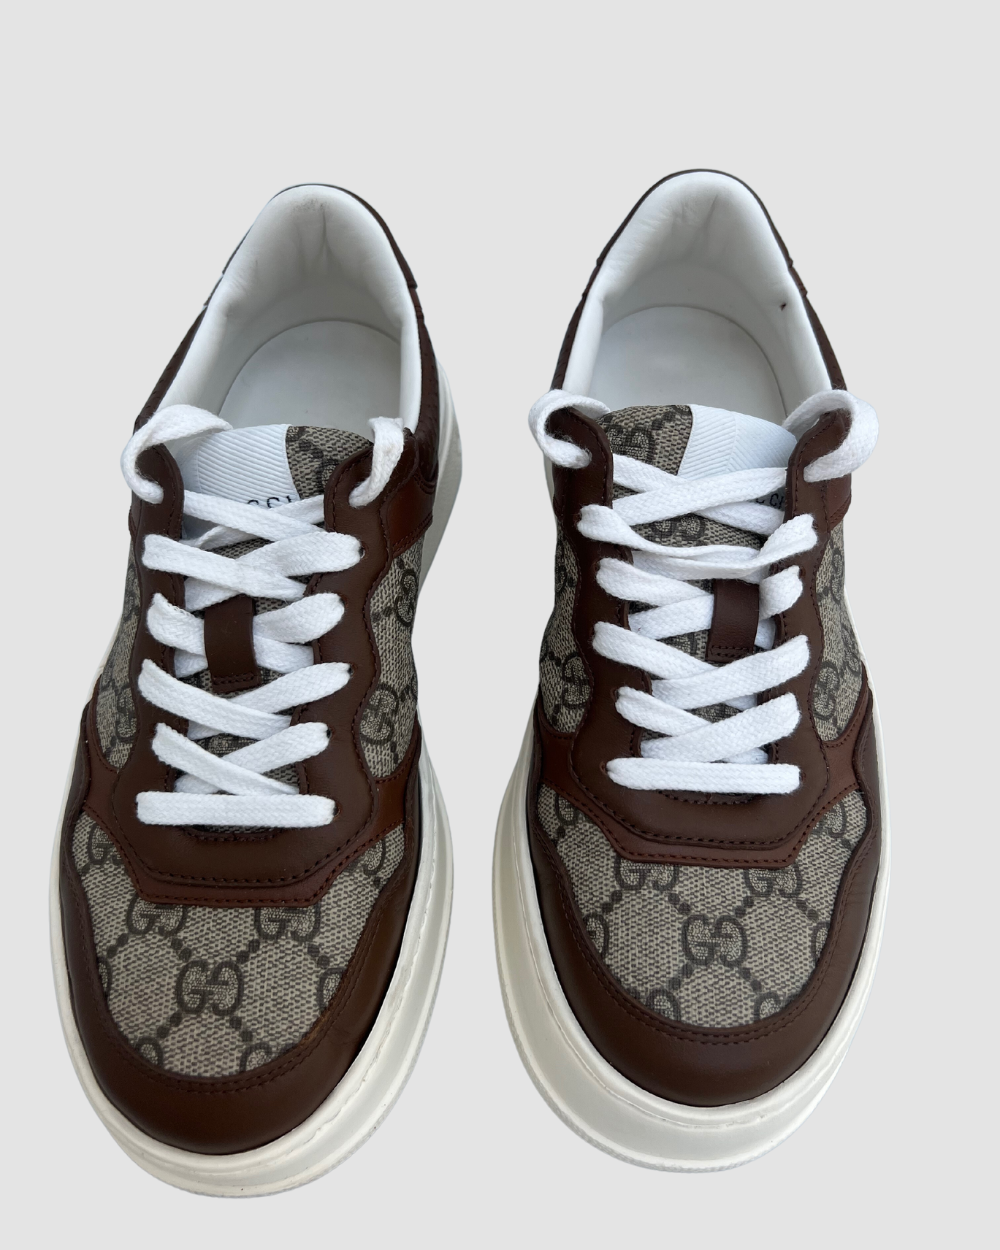 Gucci GG Canvas Leather Sneaker, 37